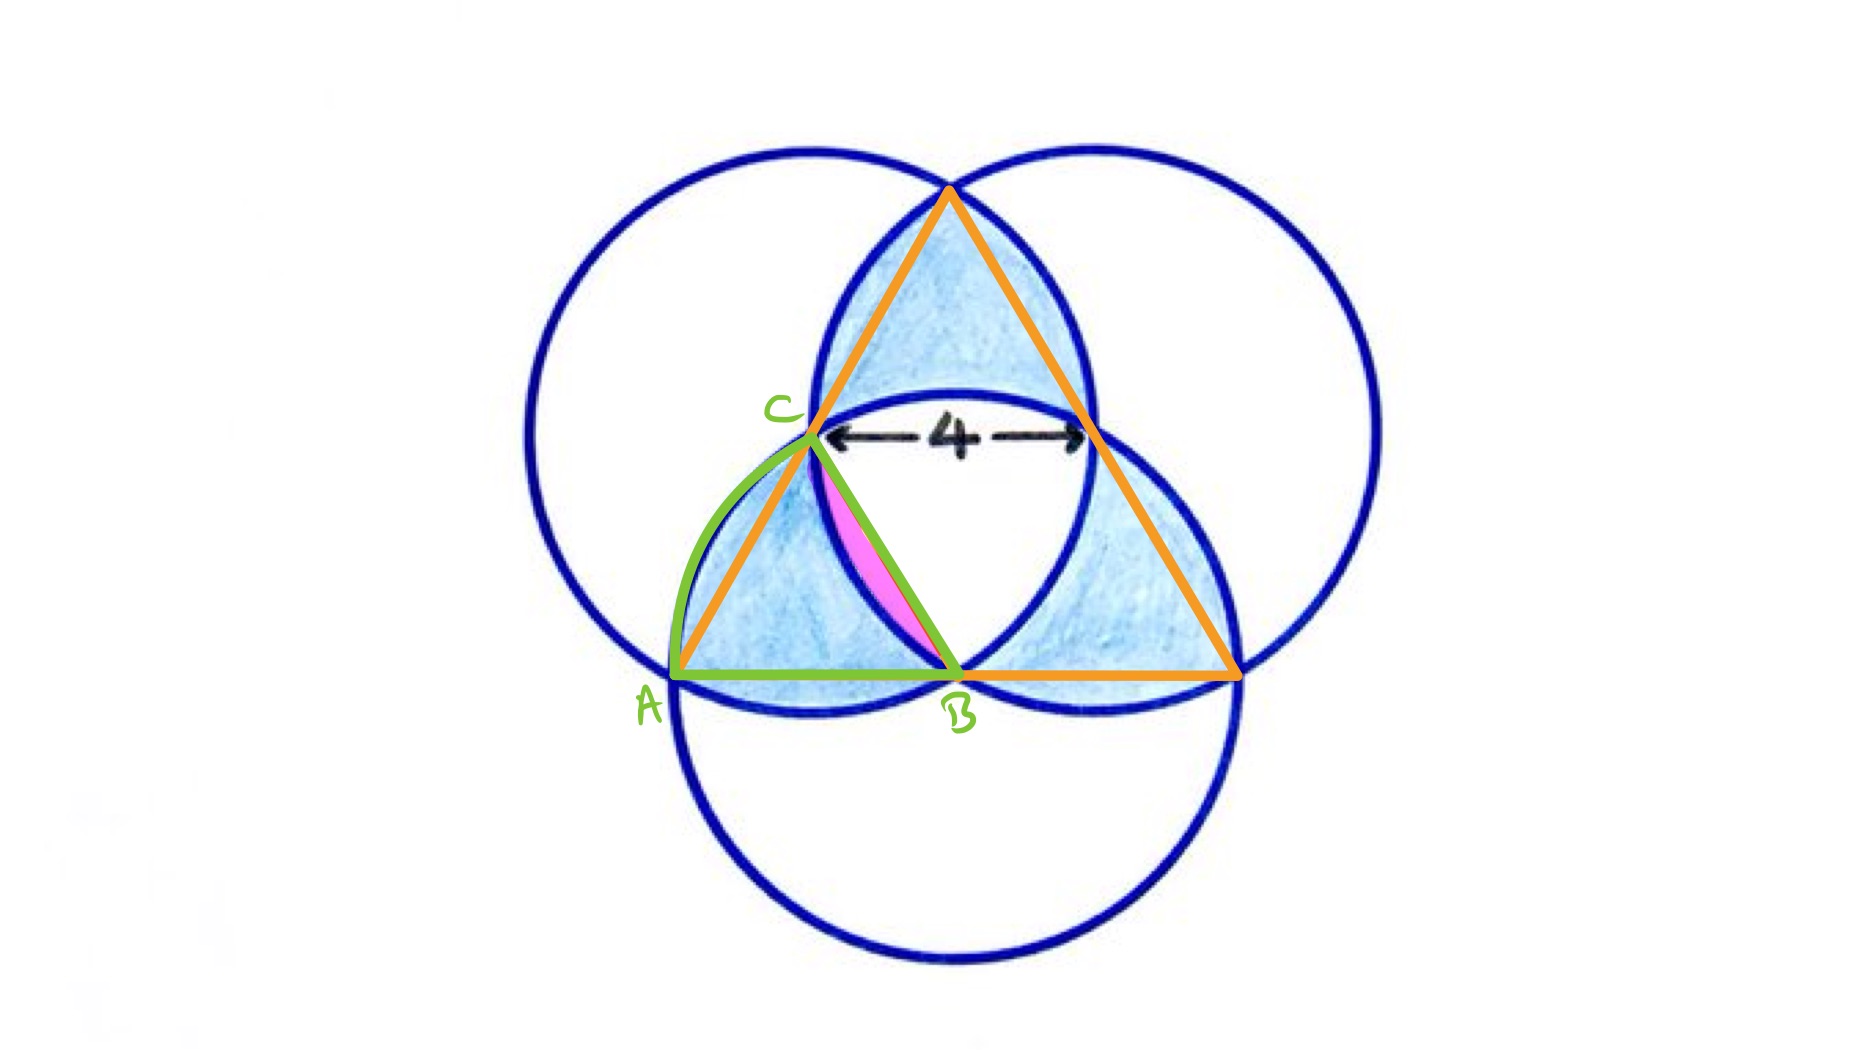 Three overlapping circles labelled